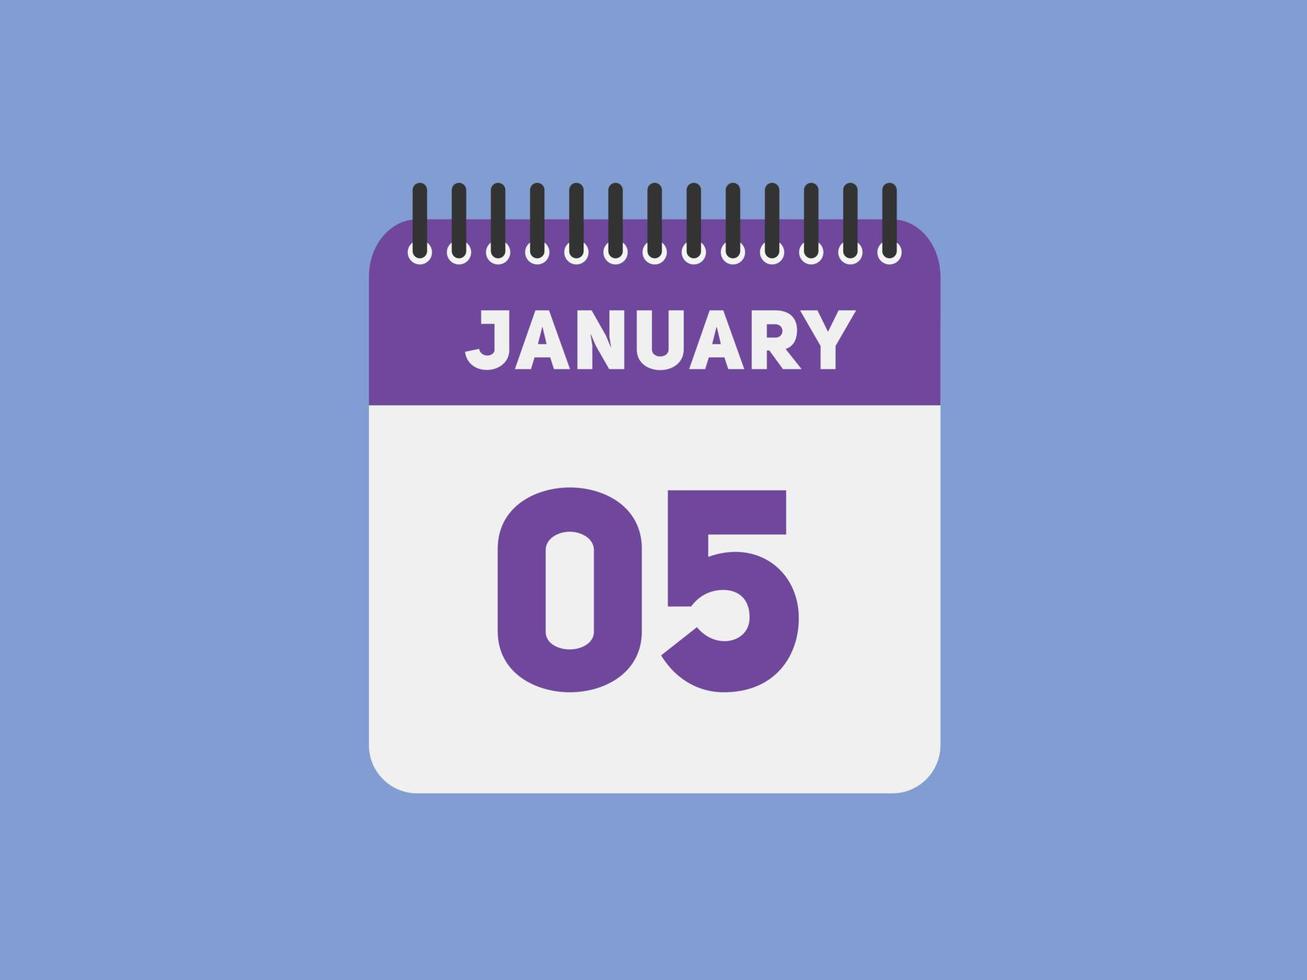 january 5 calendar reminder. 5th january daily calendar icon template. Calendar 5th january icon Design template. Vector illustration